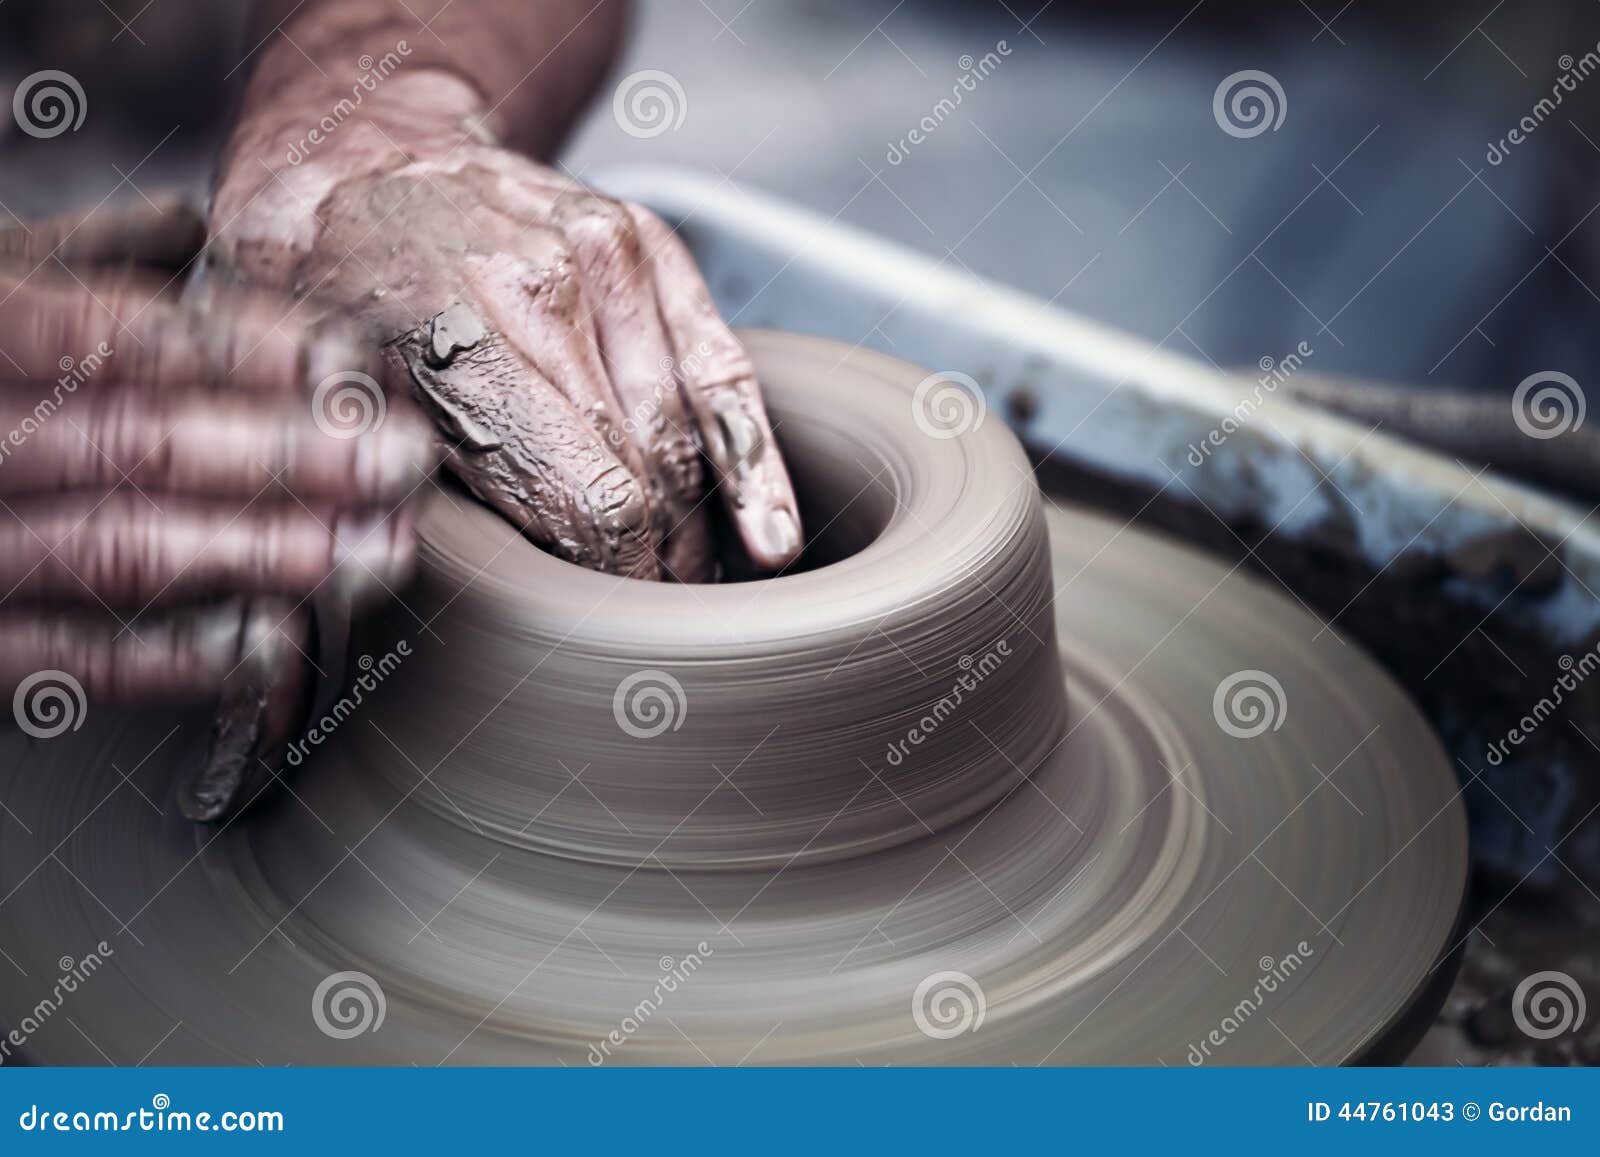 hands working on pottery wheel , artistic toned